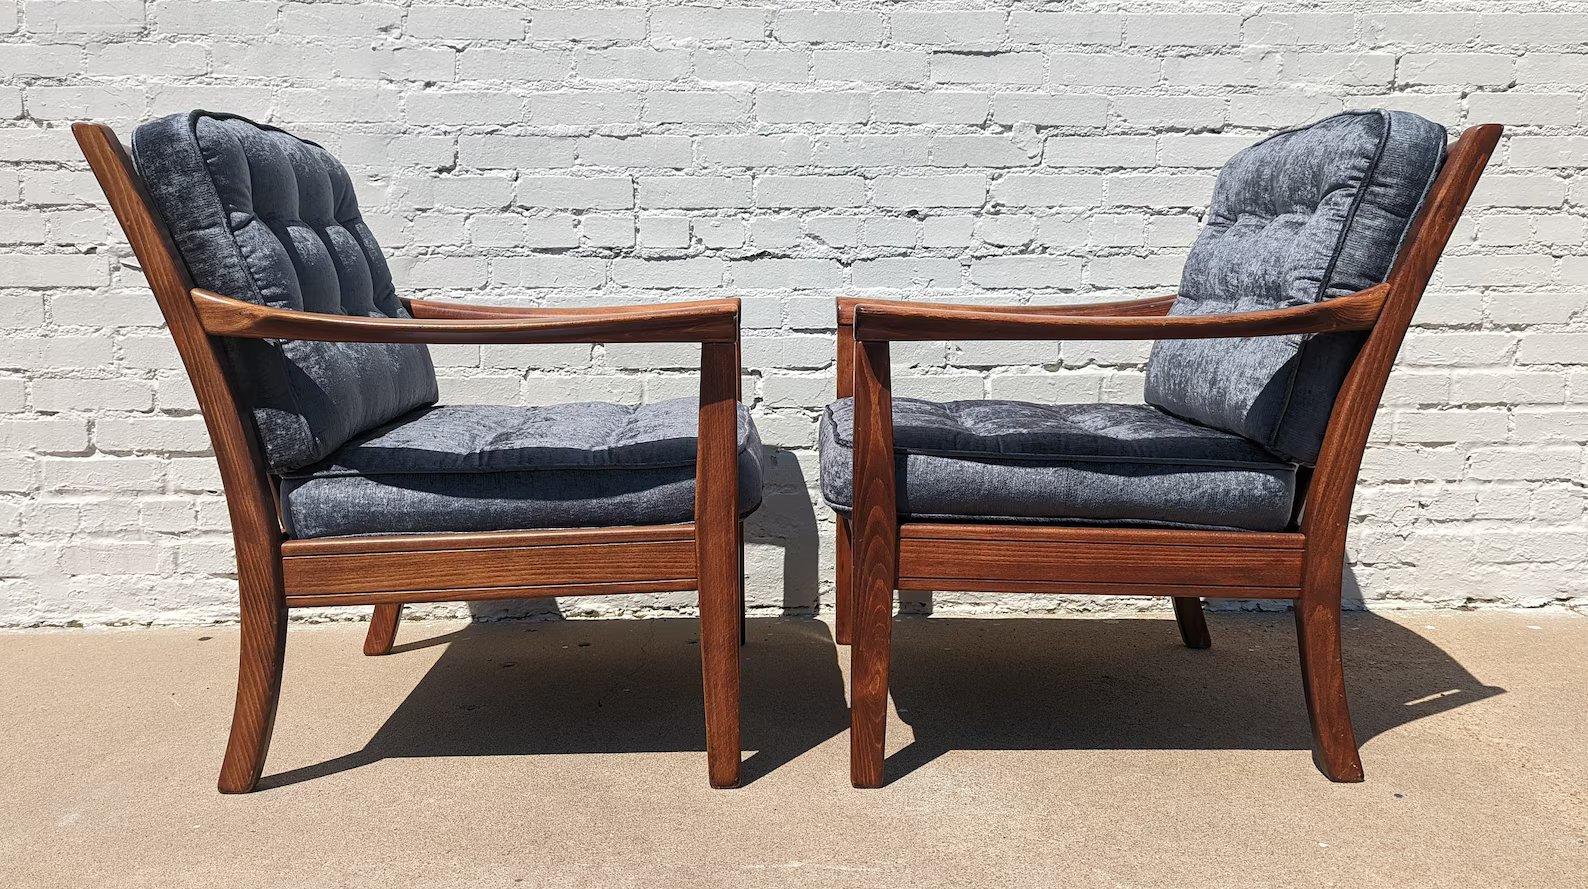 Mid Century Modern Danish Teak Side Chairs

Sold as pair. Above average vintage condition and structurally sound. Has some expected slight finish wear and scratching to frames. Cushions have been recently reupholstered. Outdoor listing pictures